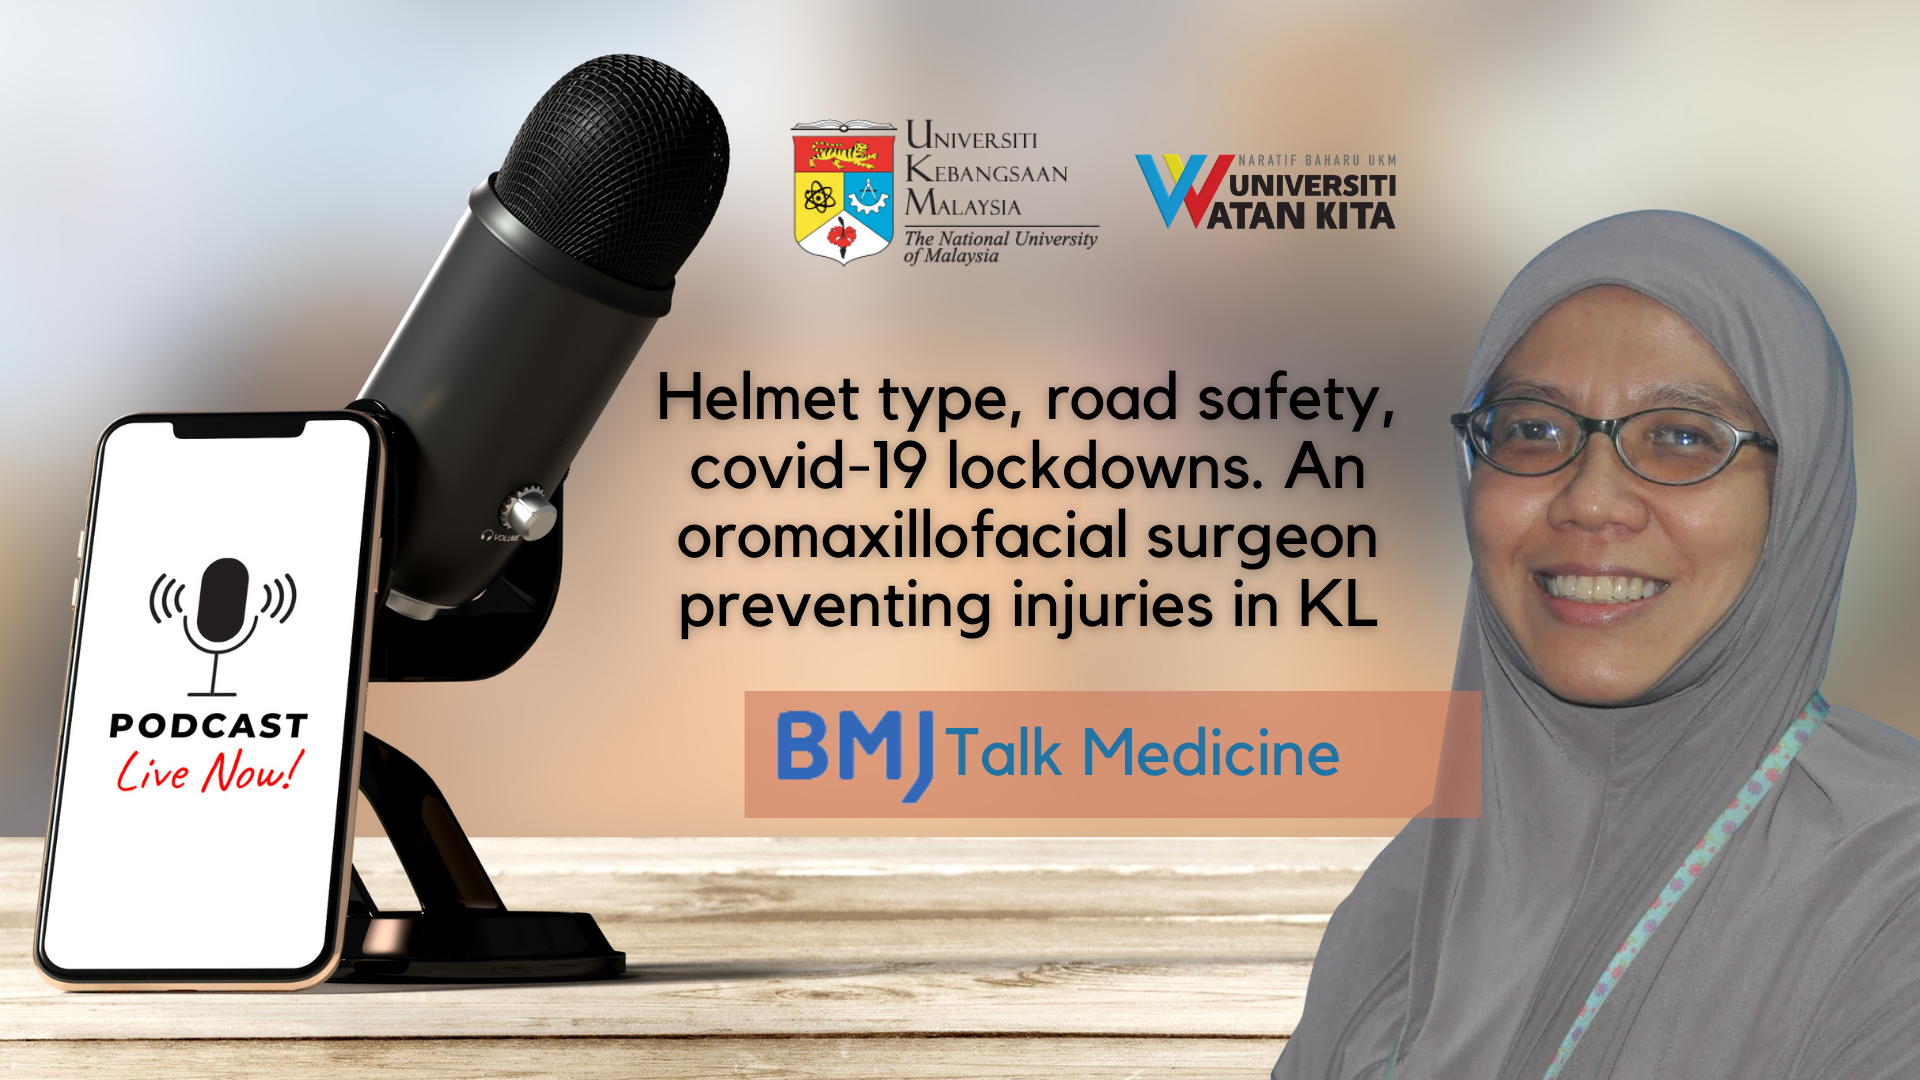 Helmet type, road safety, covid-19 lockdowns. An oromaxillofacial surgeon preventing injuries in KL